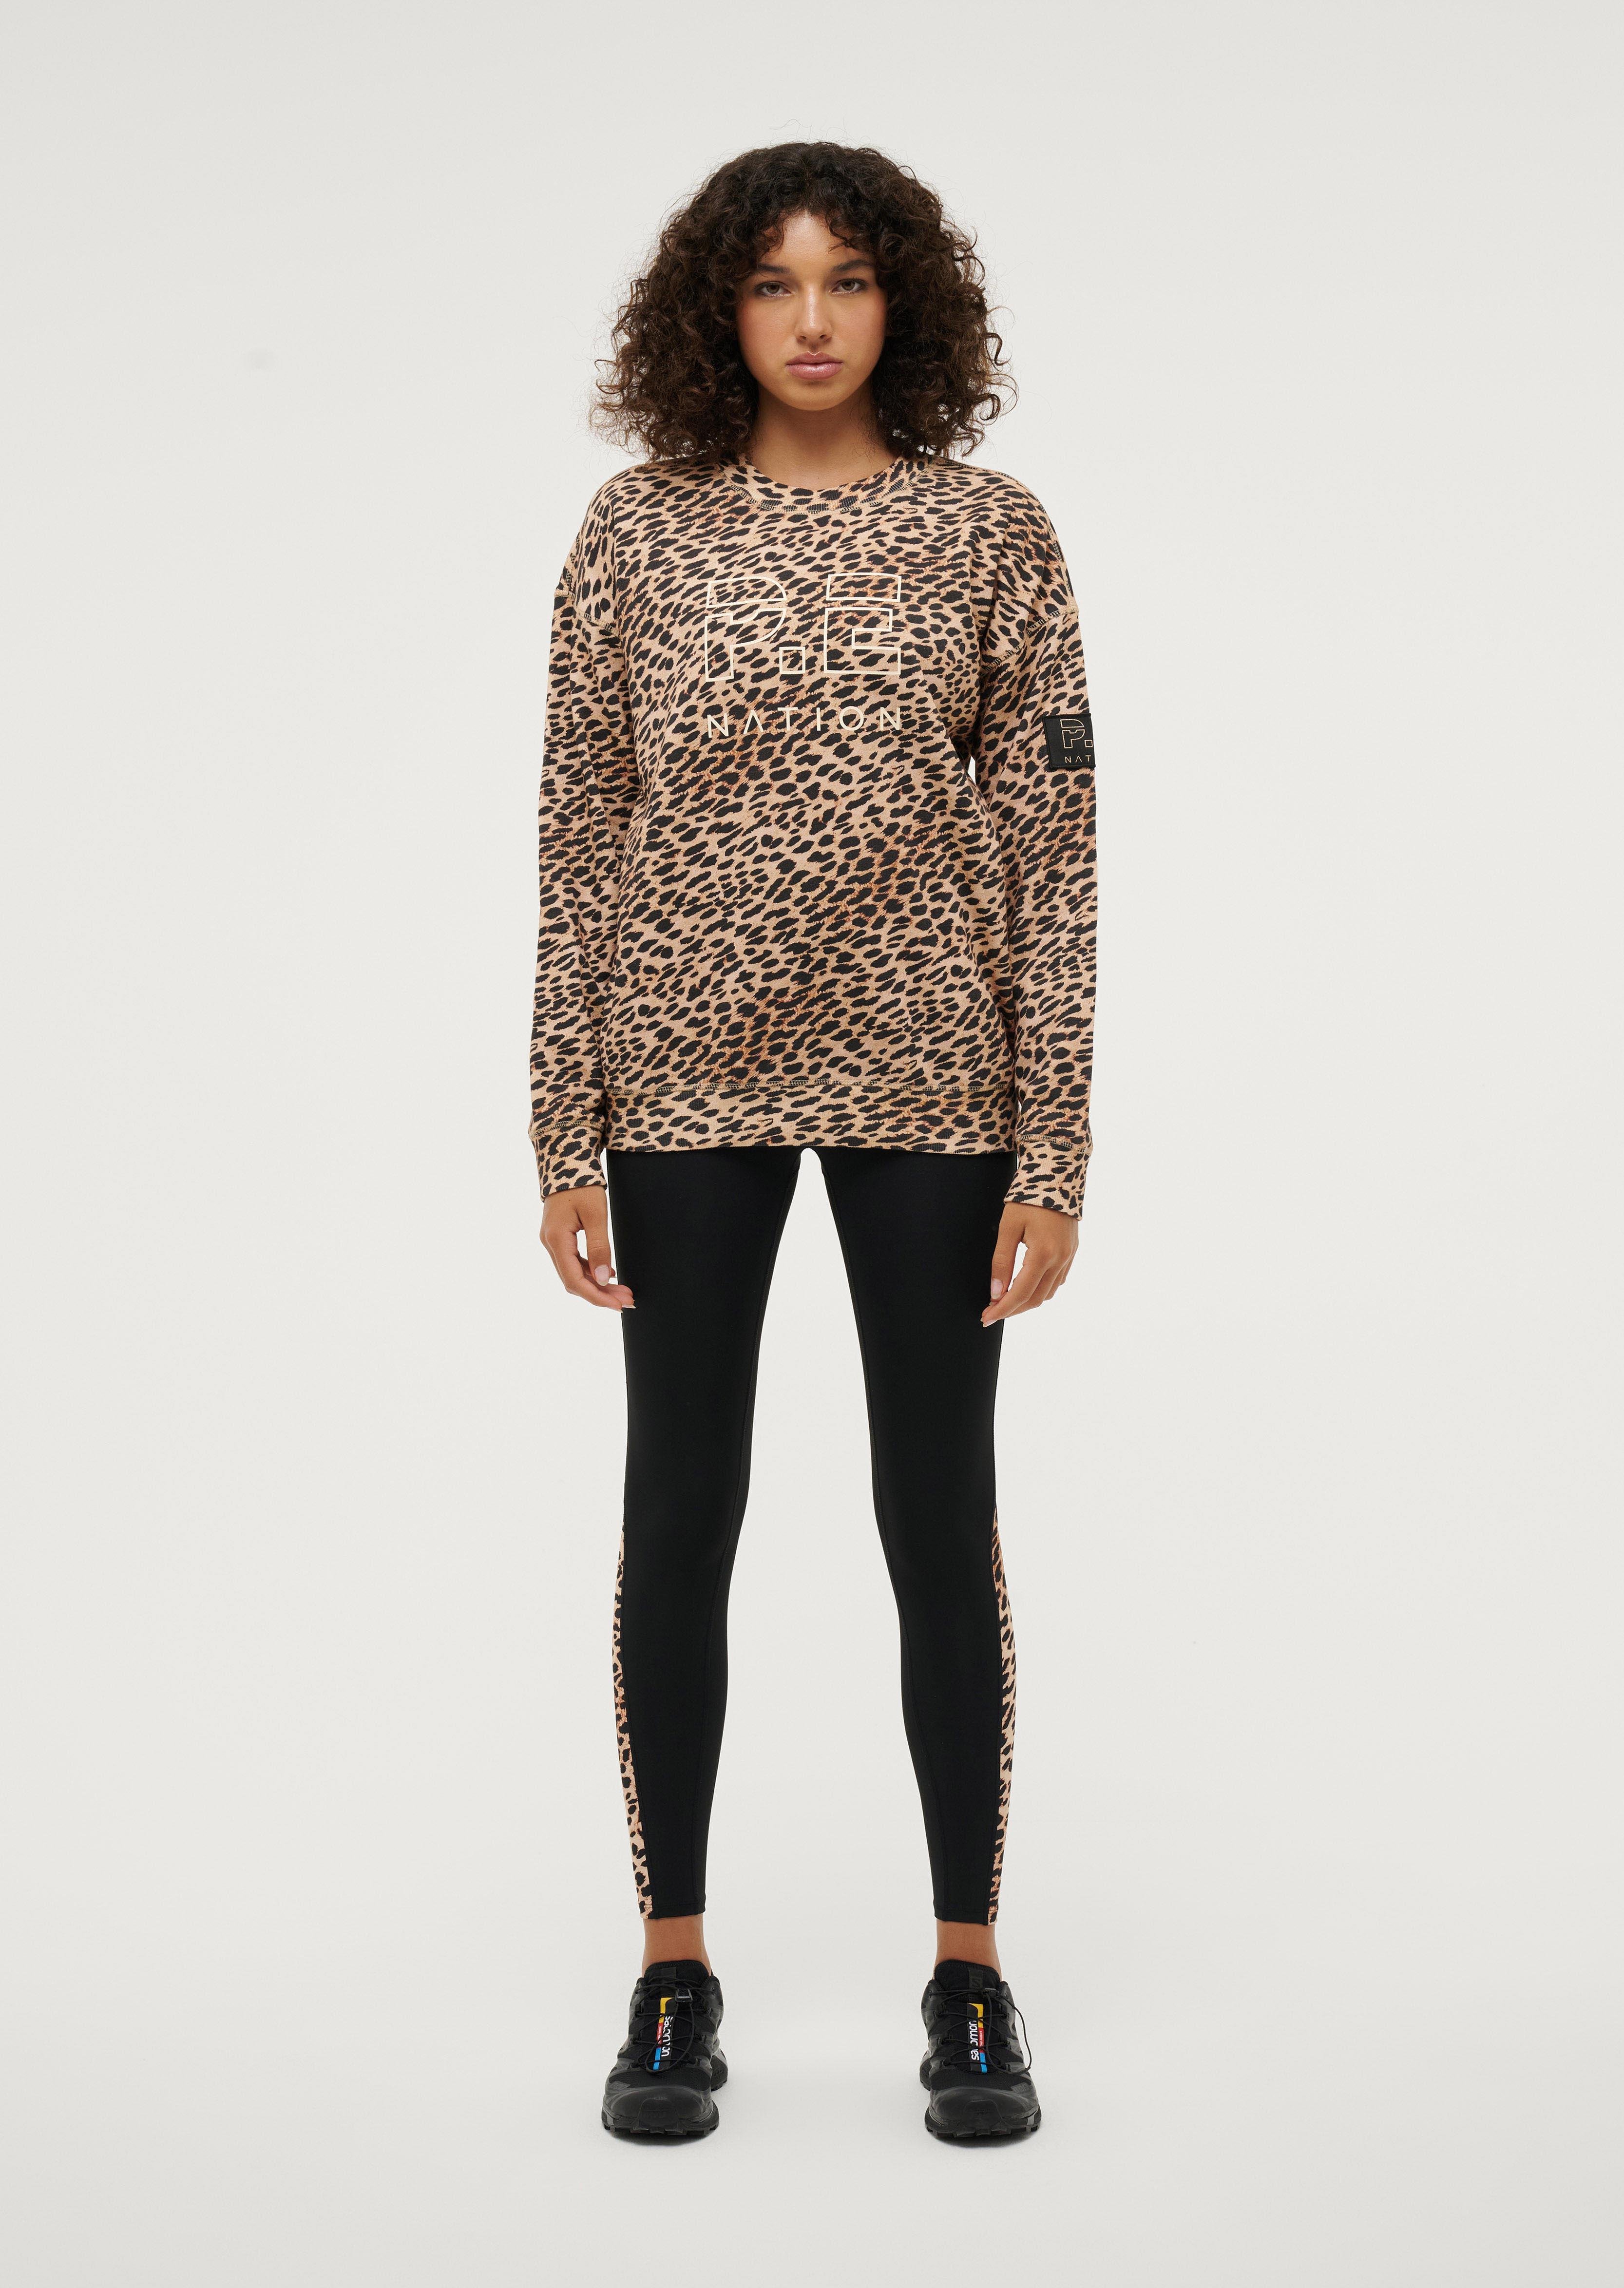 ELEMENT SWEAT IN CHEETAH PRINT by P.E NATION